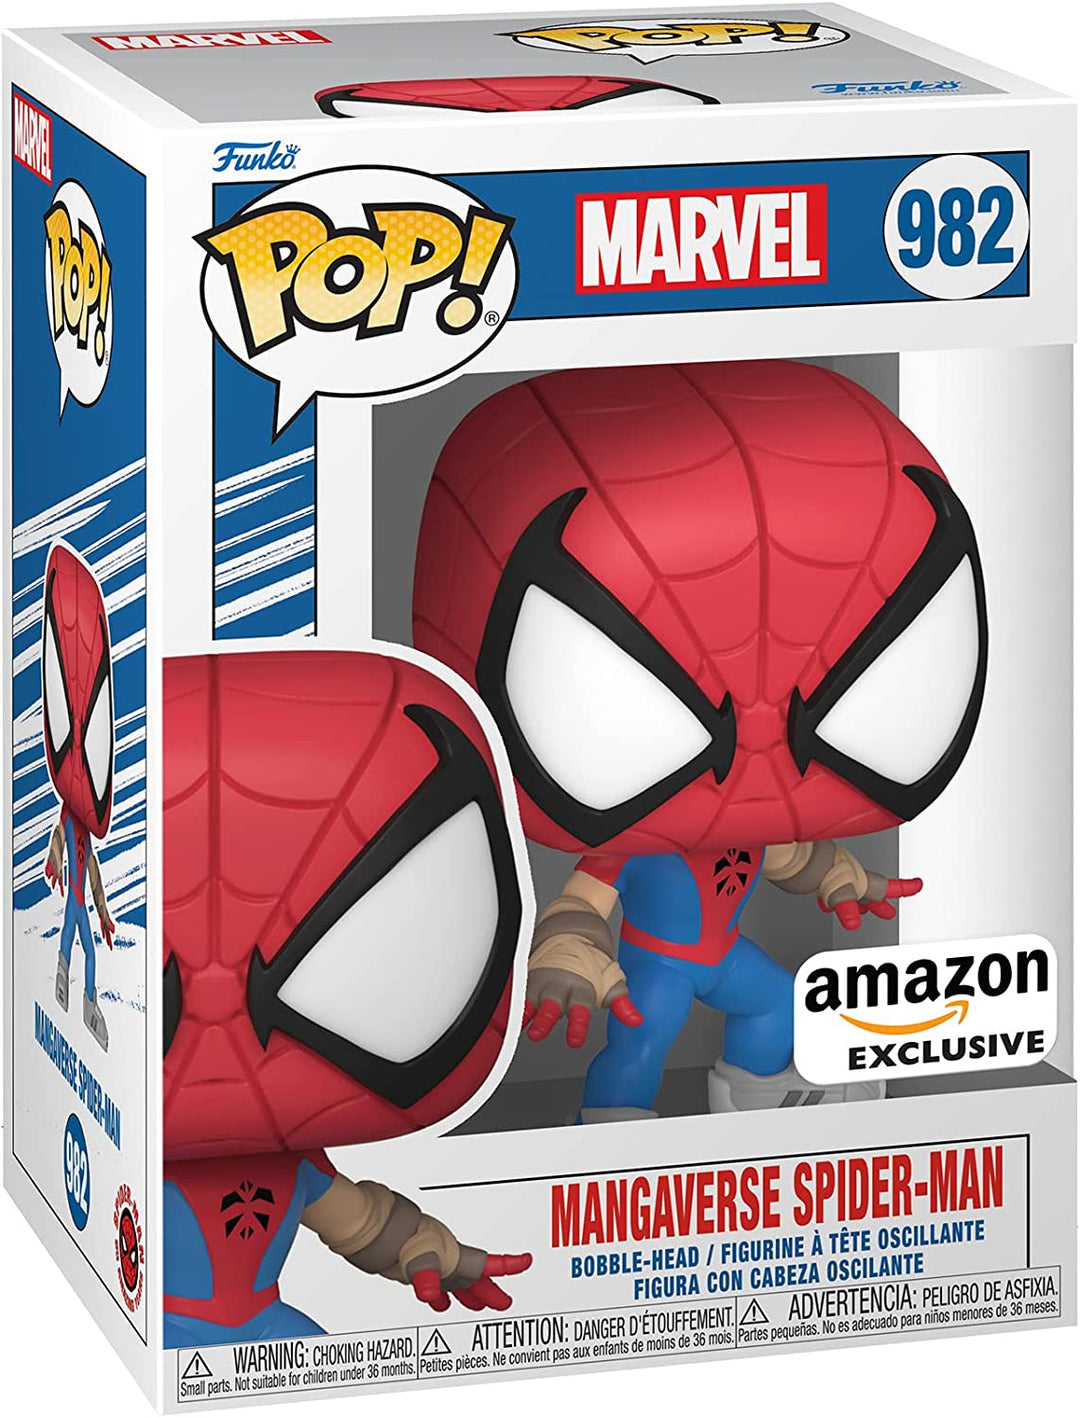 Marvel: Year of the Spider - Mangaverse Spider-Man Exclusive Funko